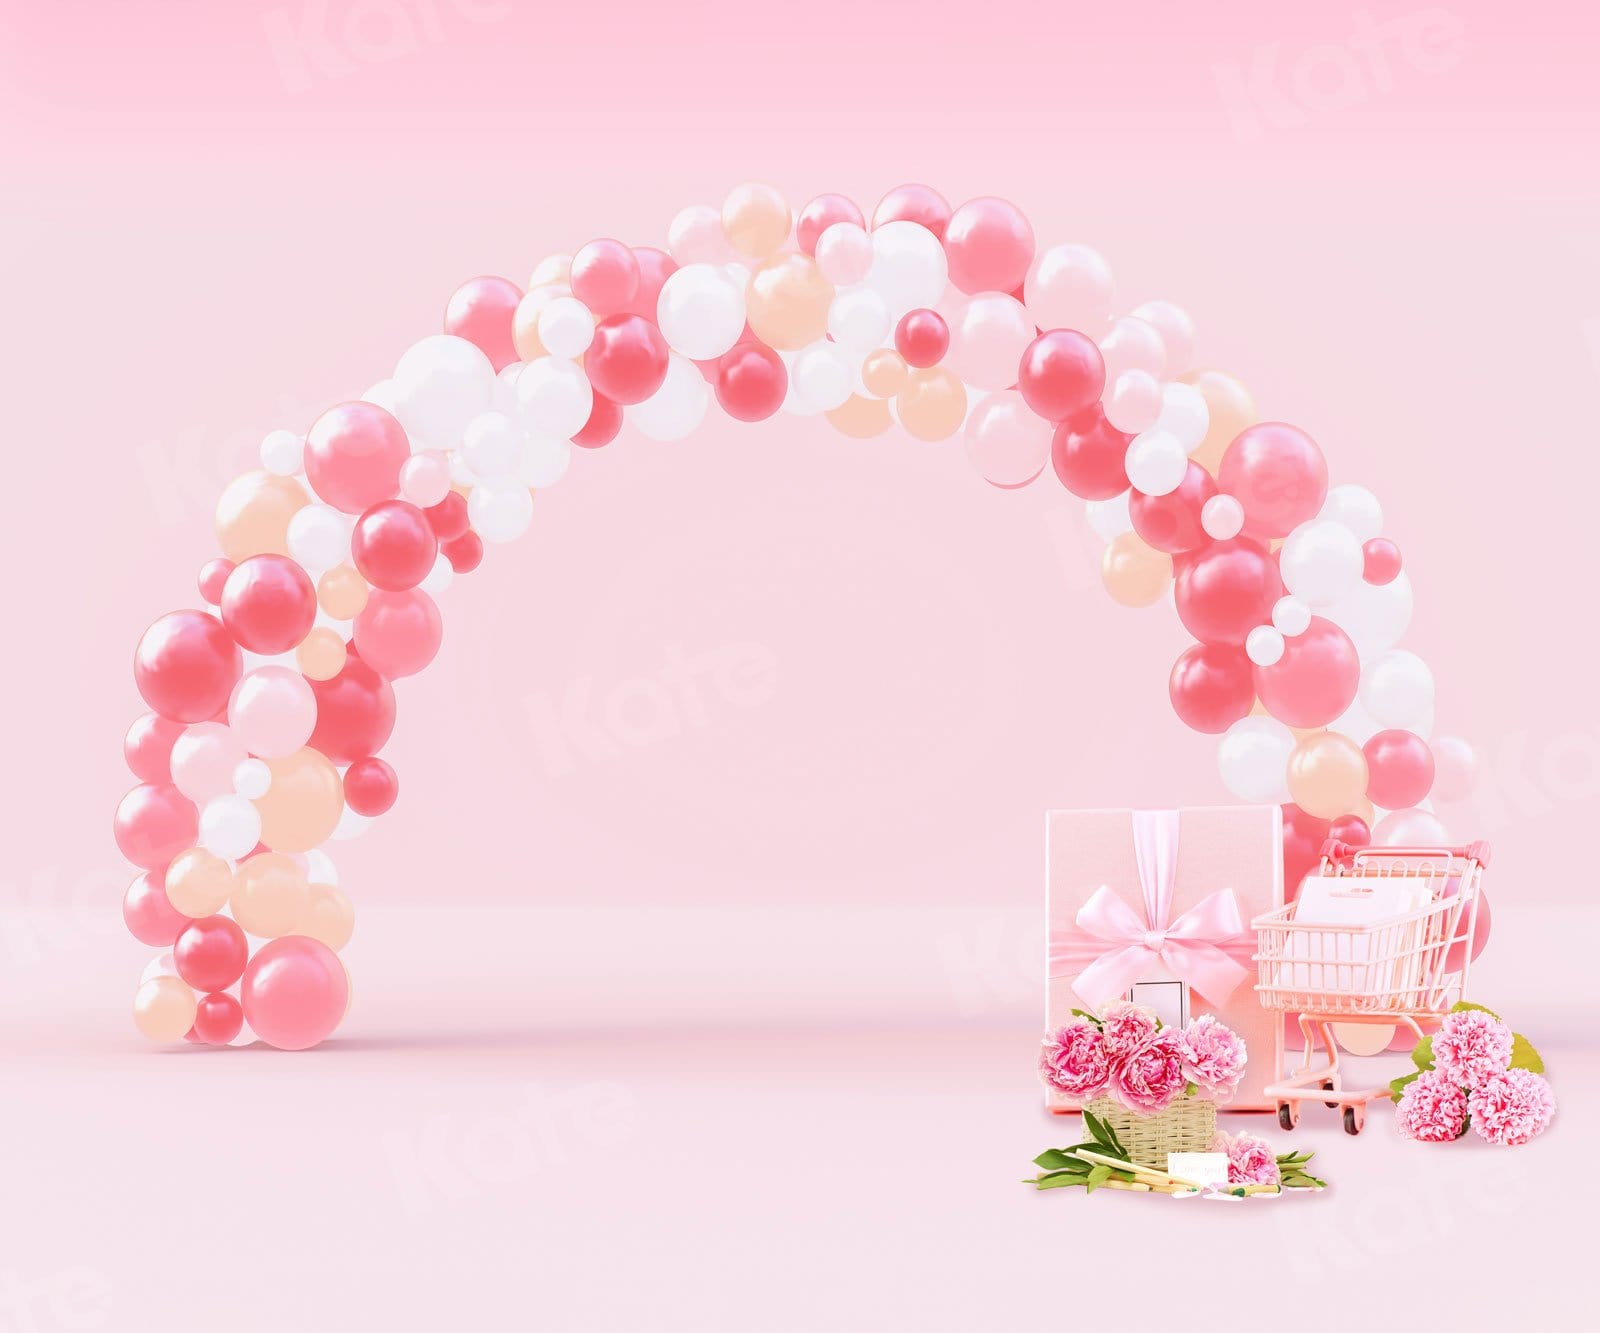 Kate Valentin's Day Backdrop Pink Balloons Cake Smash for Photography